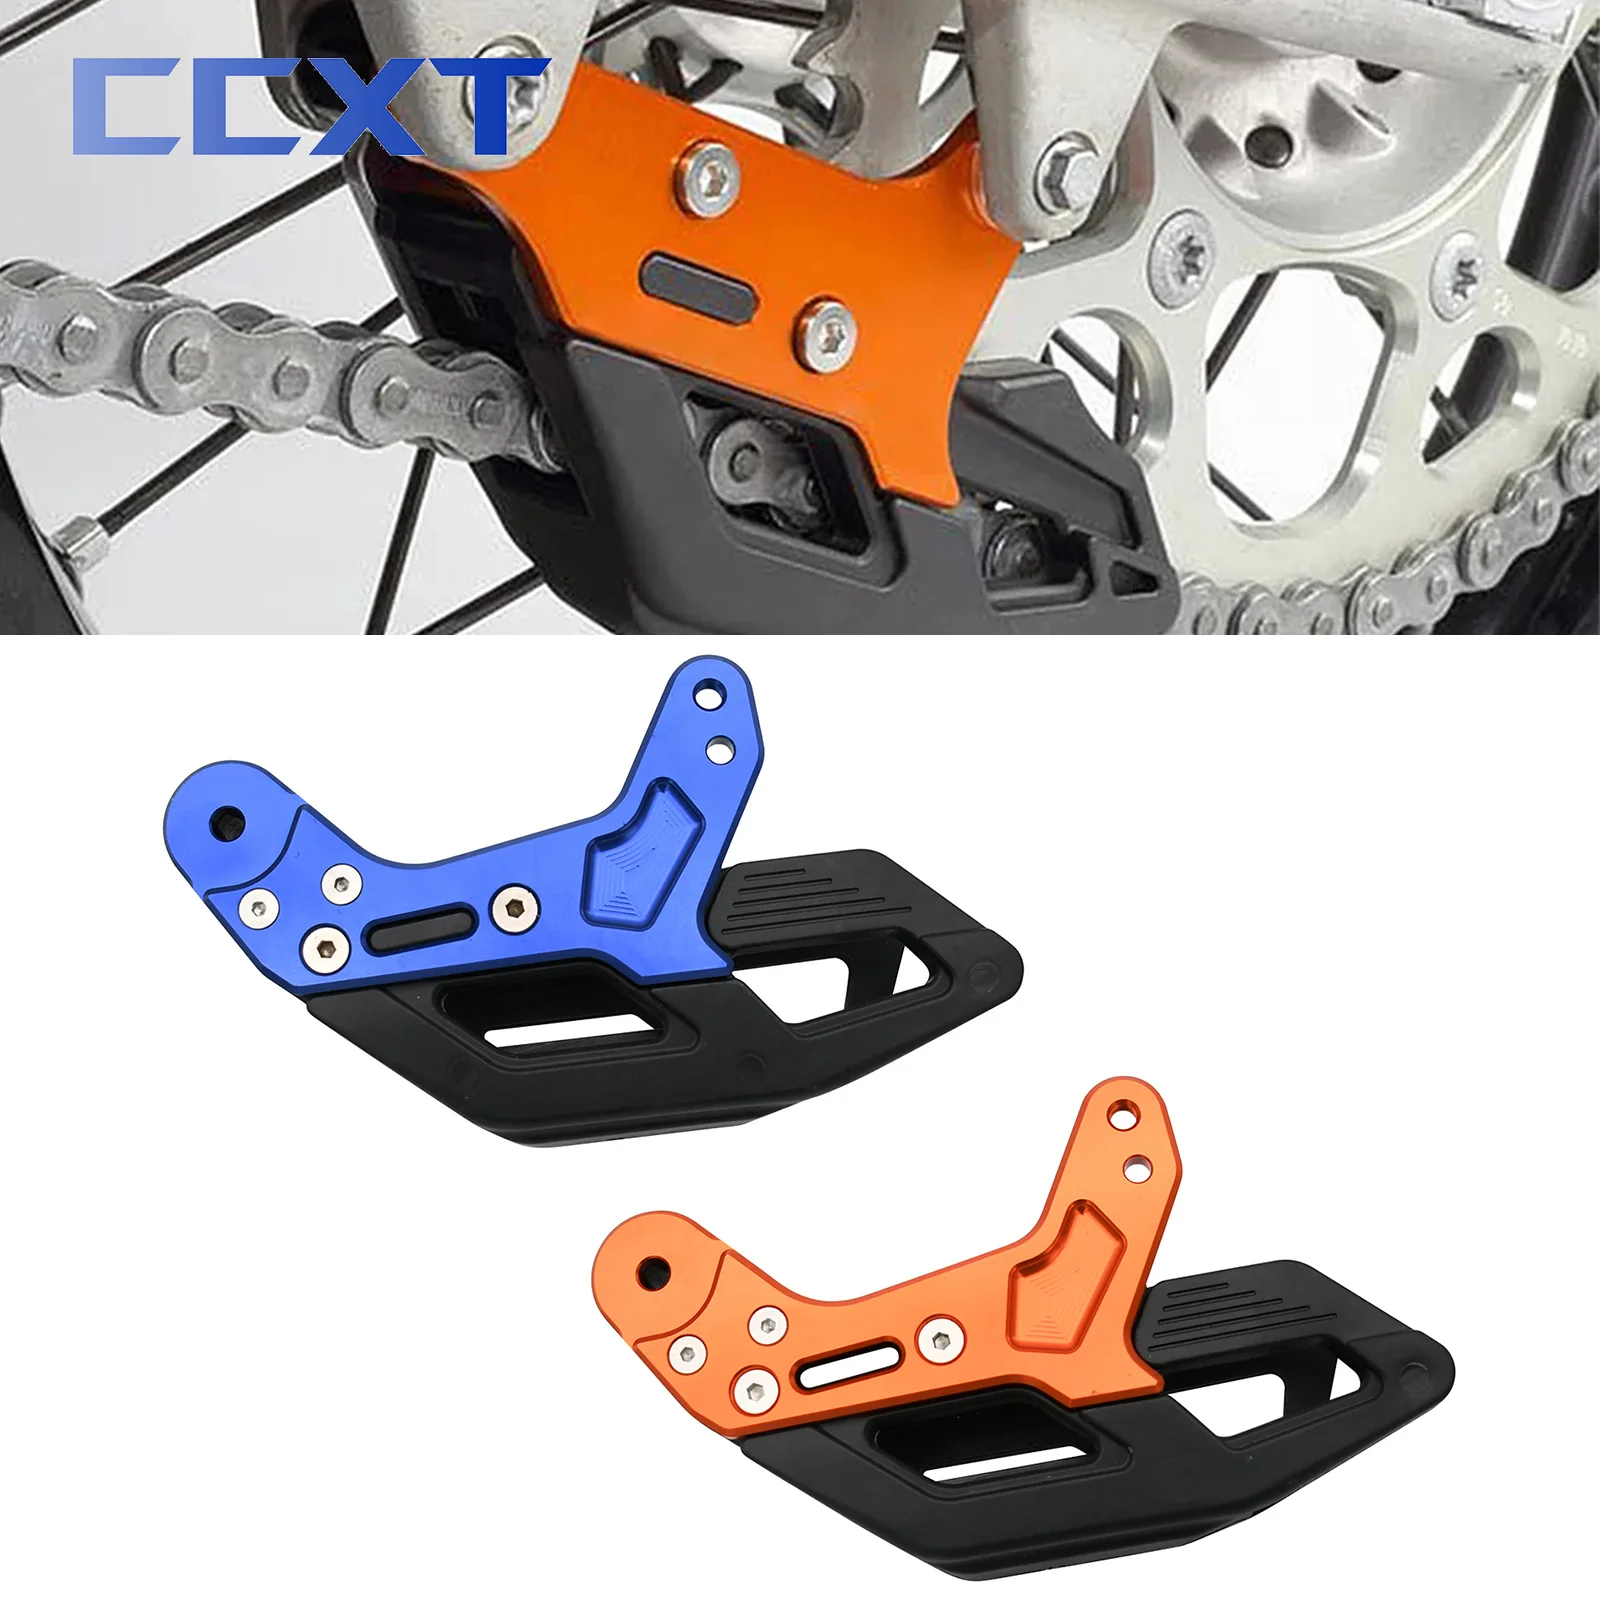 

CNC Sprocket Chain Guide Guard For Husqvarna TC FC TE FE TX FX FS For KTM SX SXF XC XCF EXC EXCF XCW XCFW 125 250 300 350 450